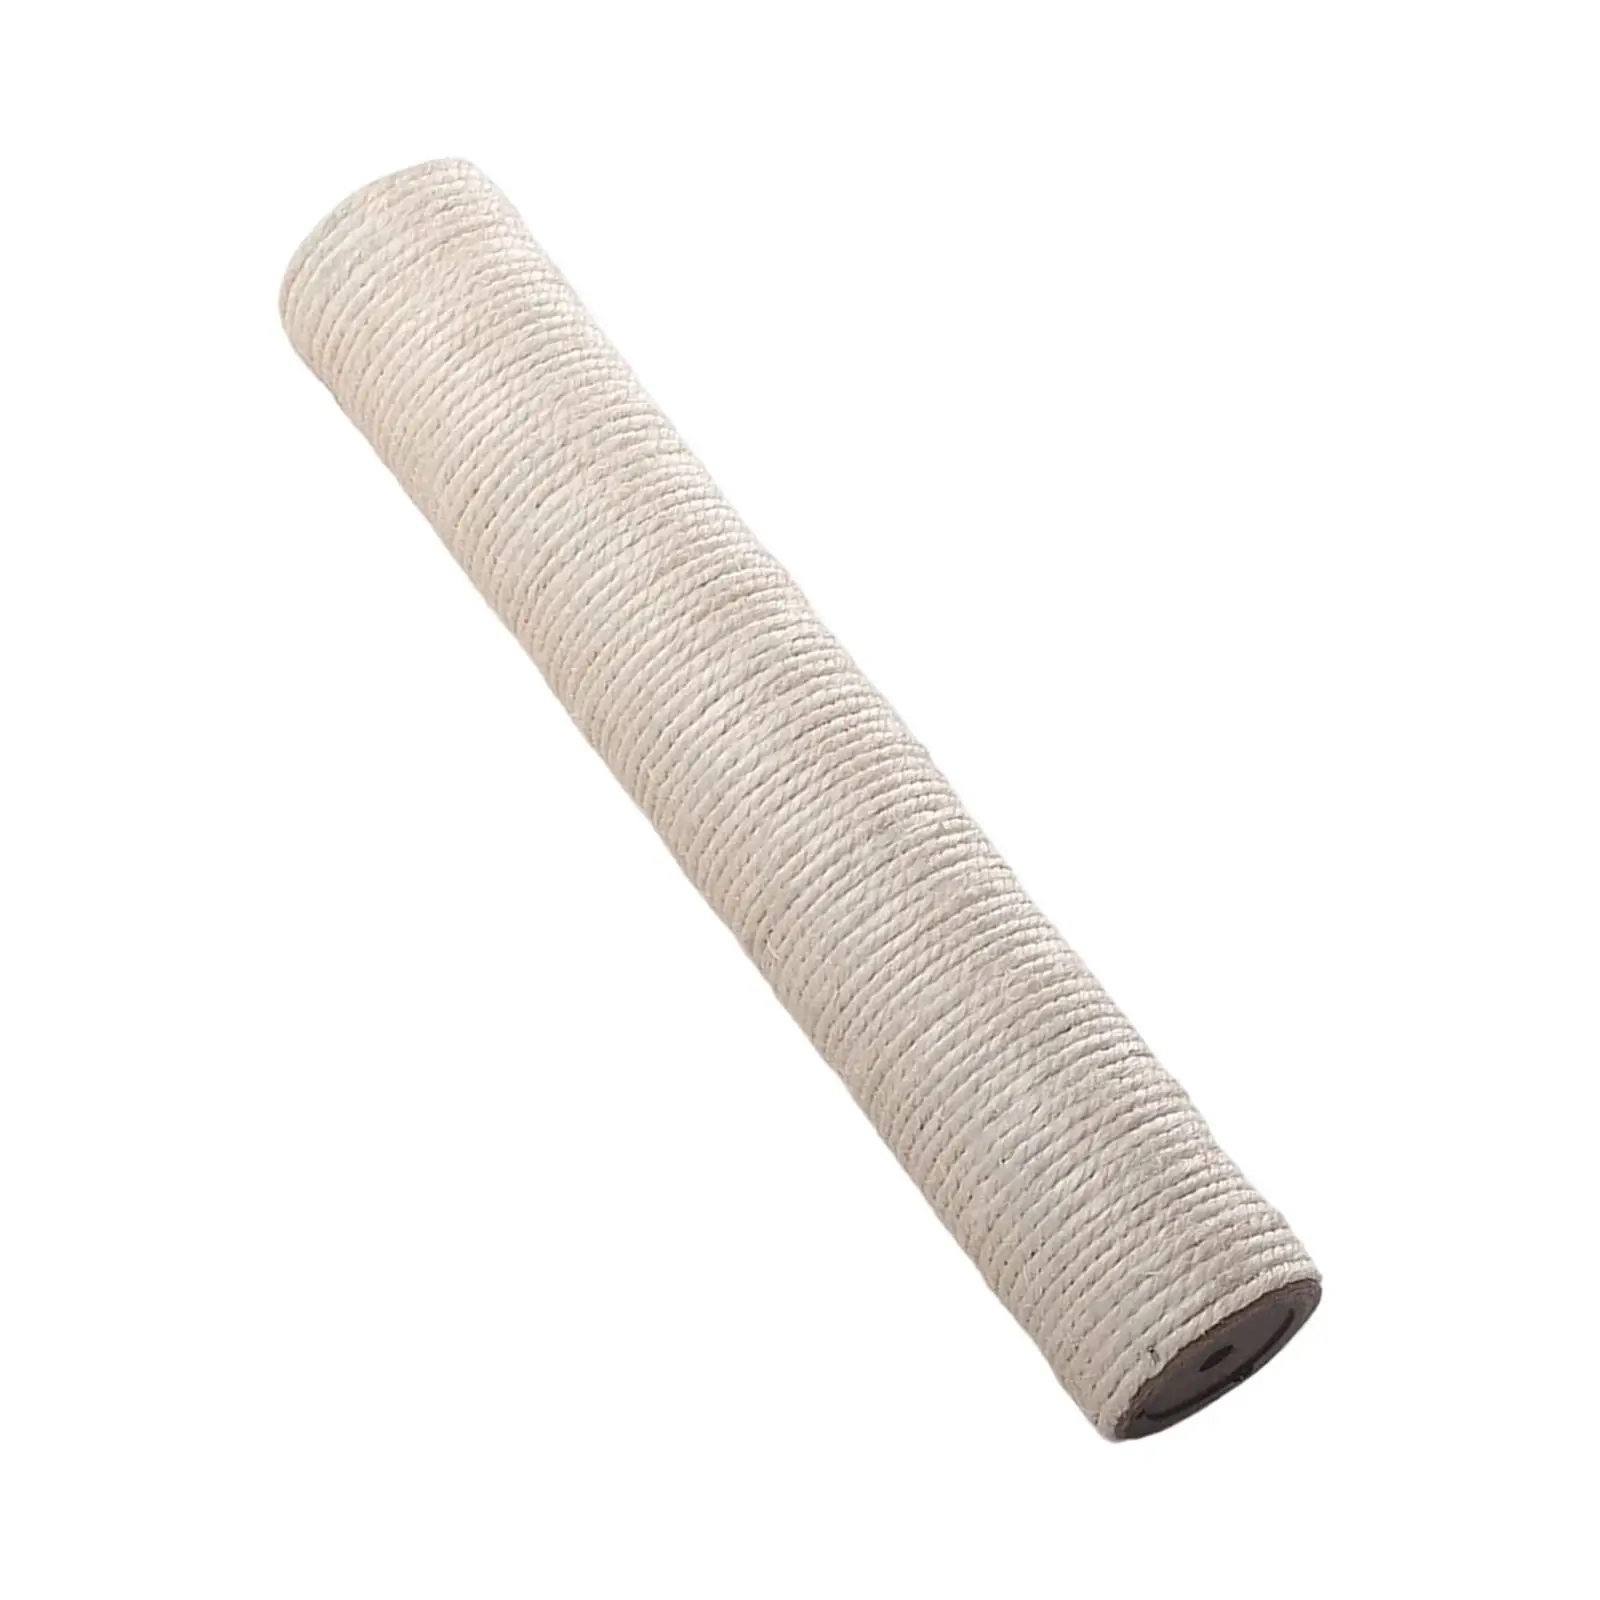 Cat scratching posts Replacement Extension Post Multichoices DIY Scratch Post